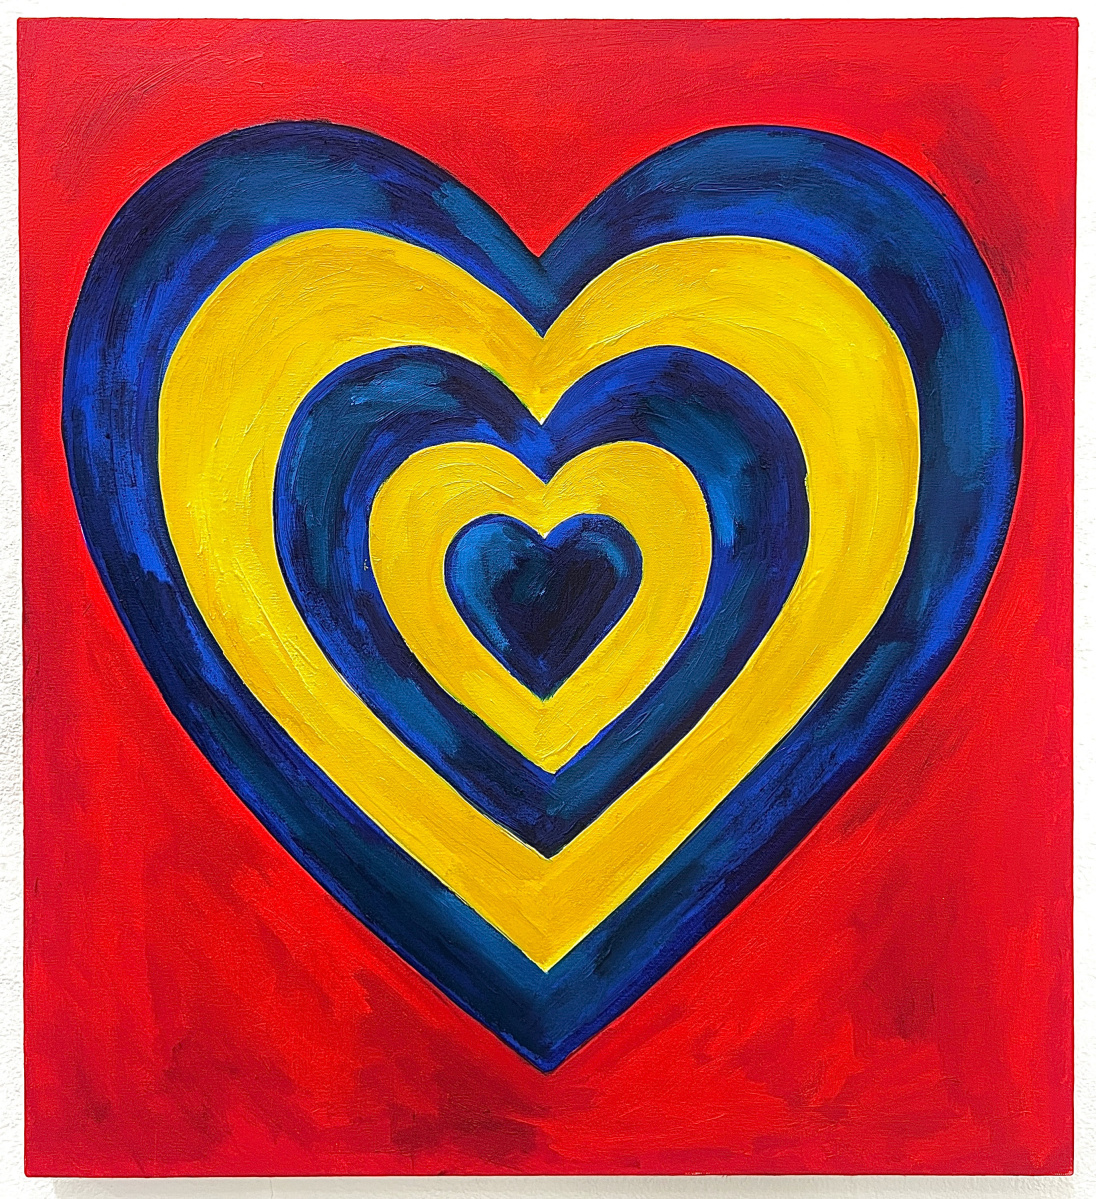 The image shows a painting of five concentric hearts in blue and yellow over a red background.